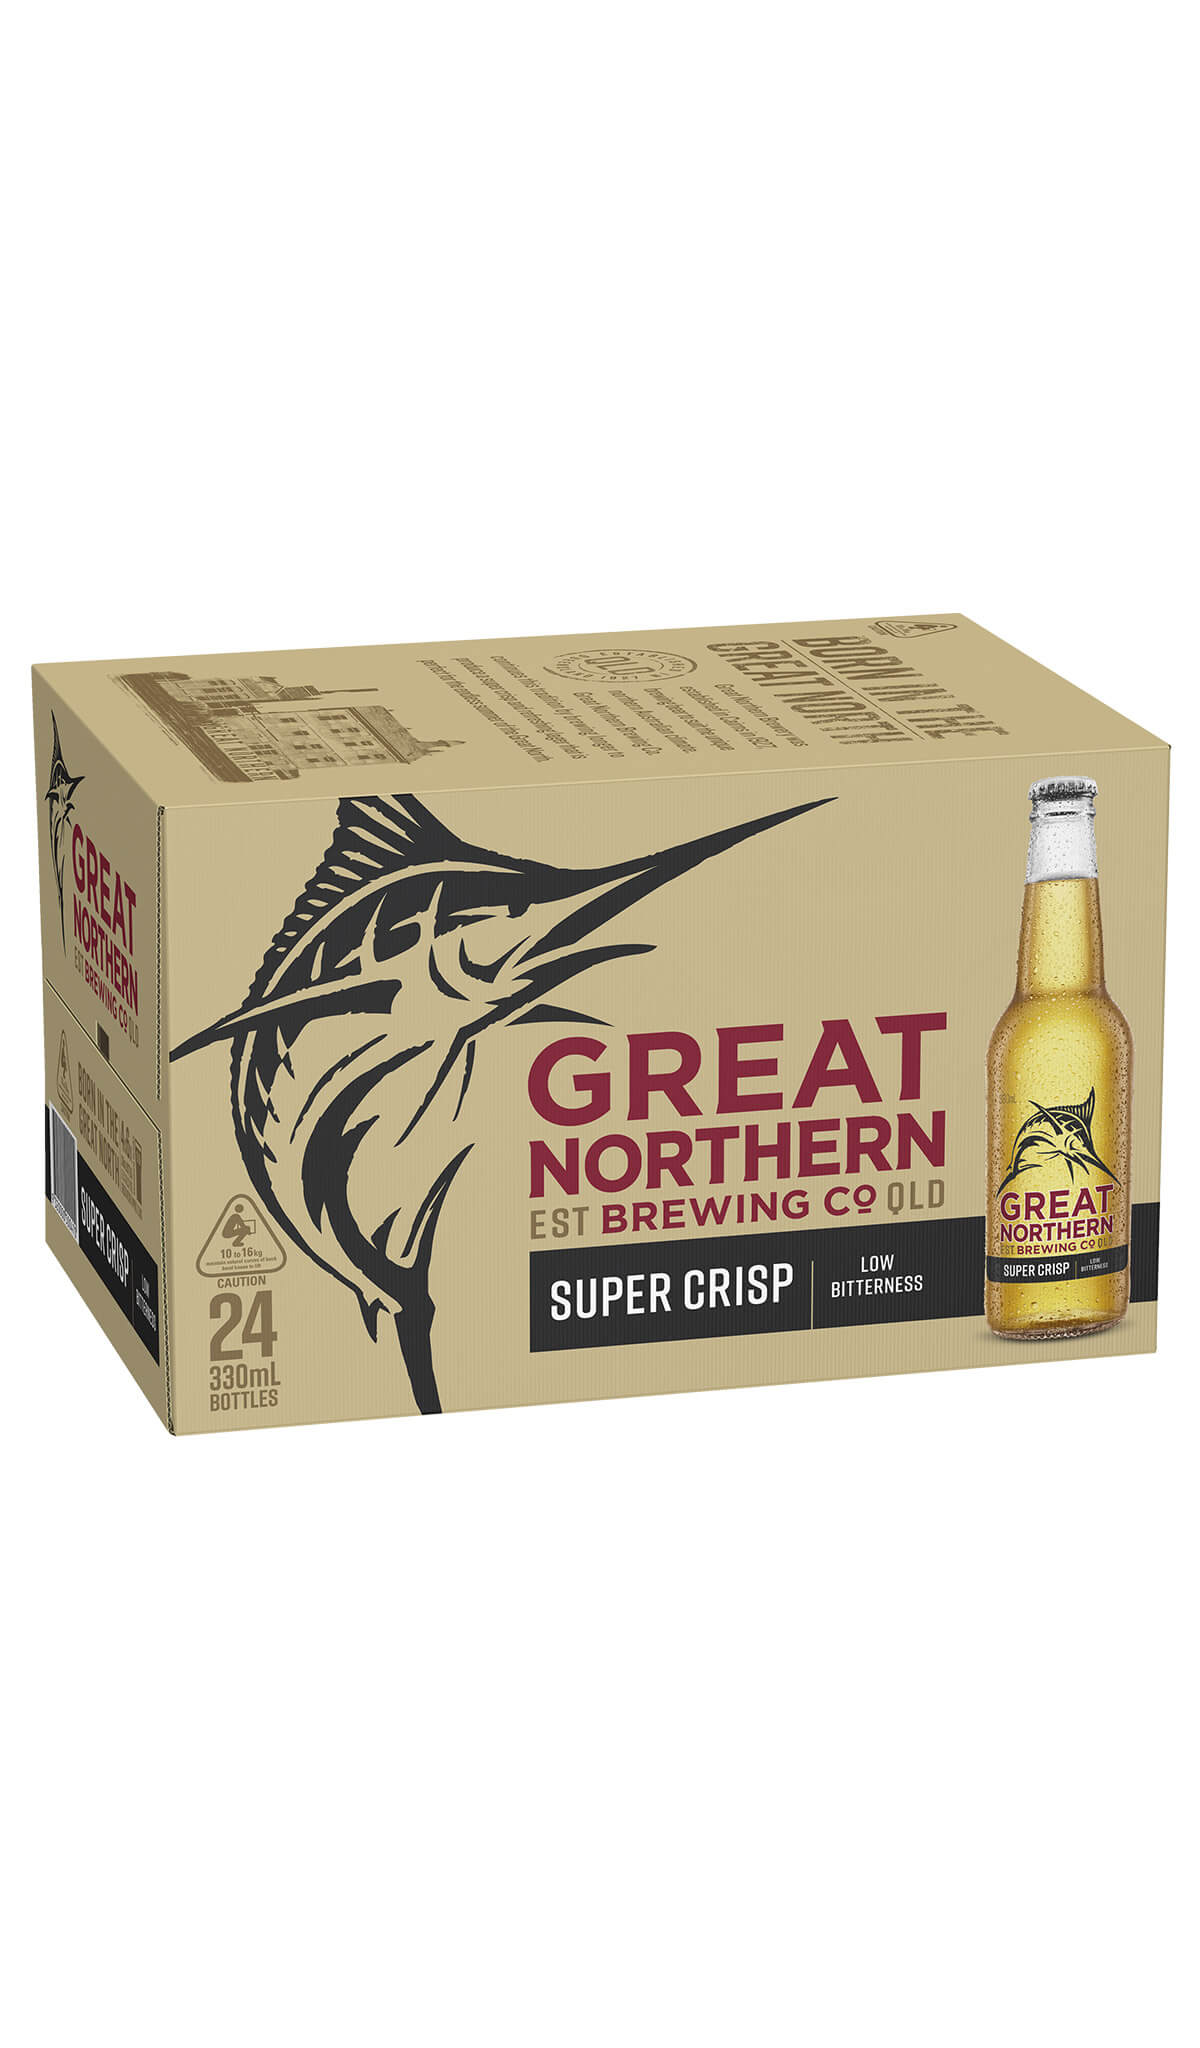 Find out more, explore the range and purchase Great Northern Super Crisp 24 bottle pack at Wine Sellers Direct - Australia's independent liquor specialists.